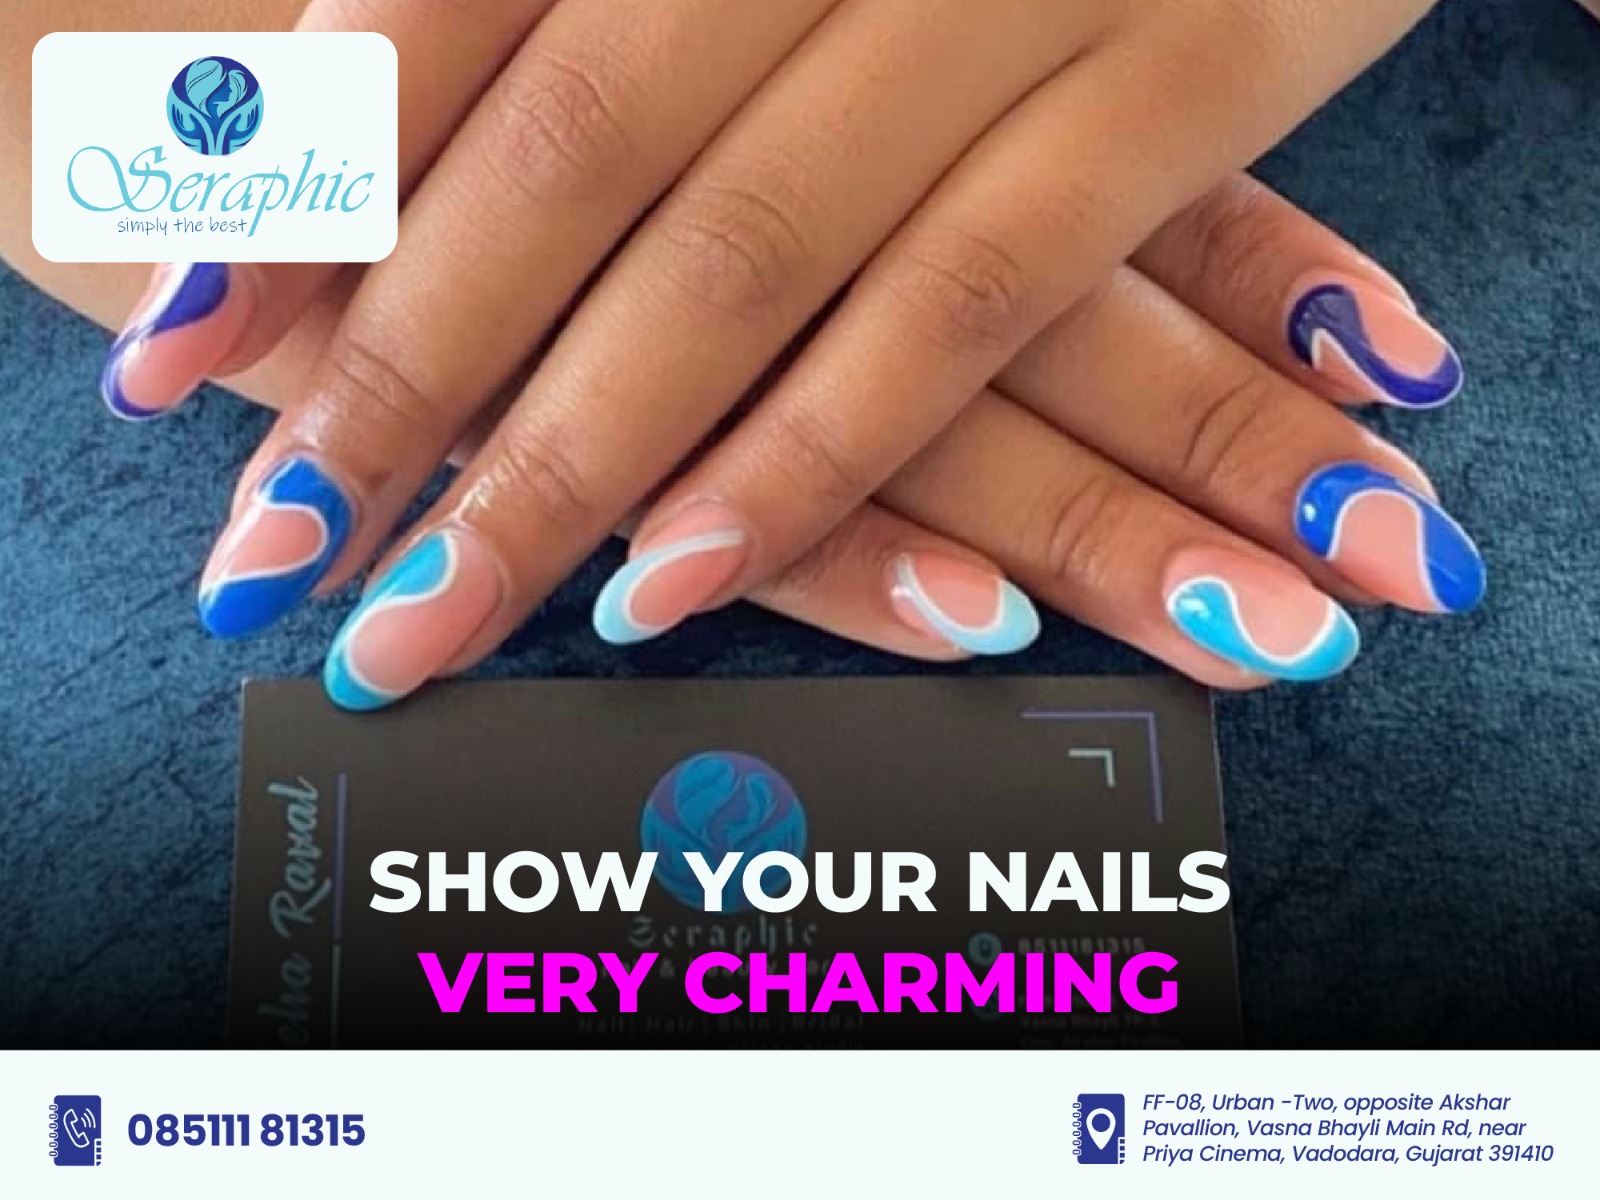 show your nails very charming from seraphic nail salon in vadodara